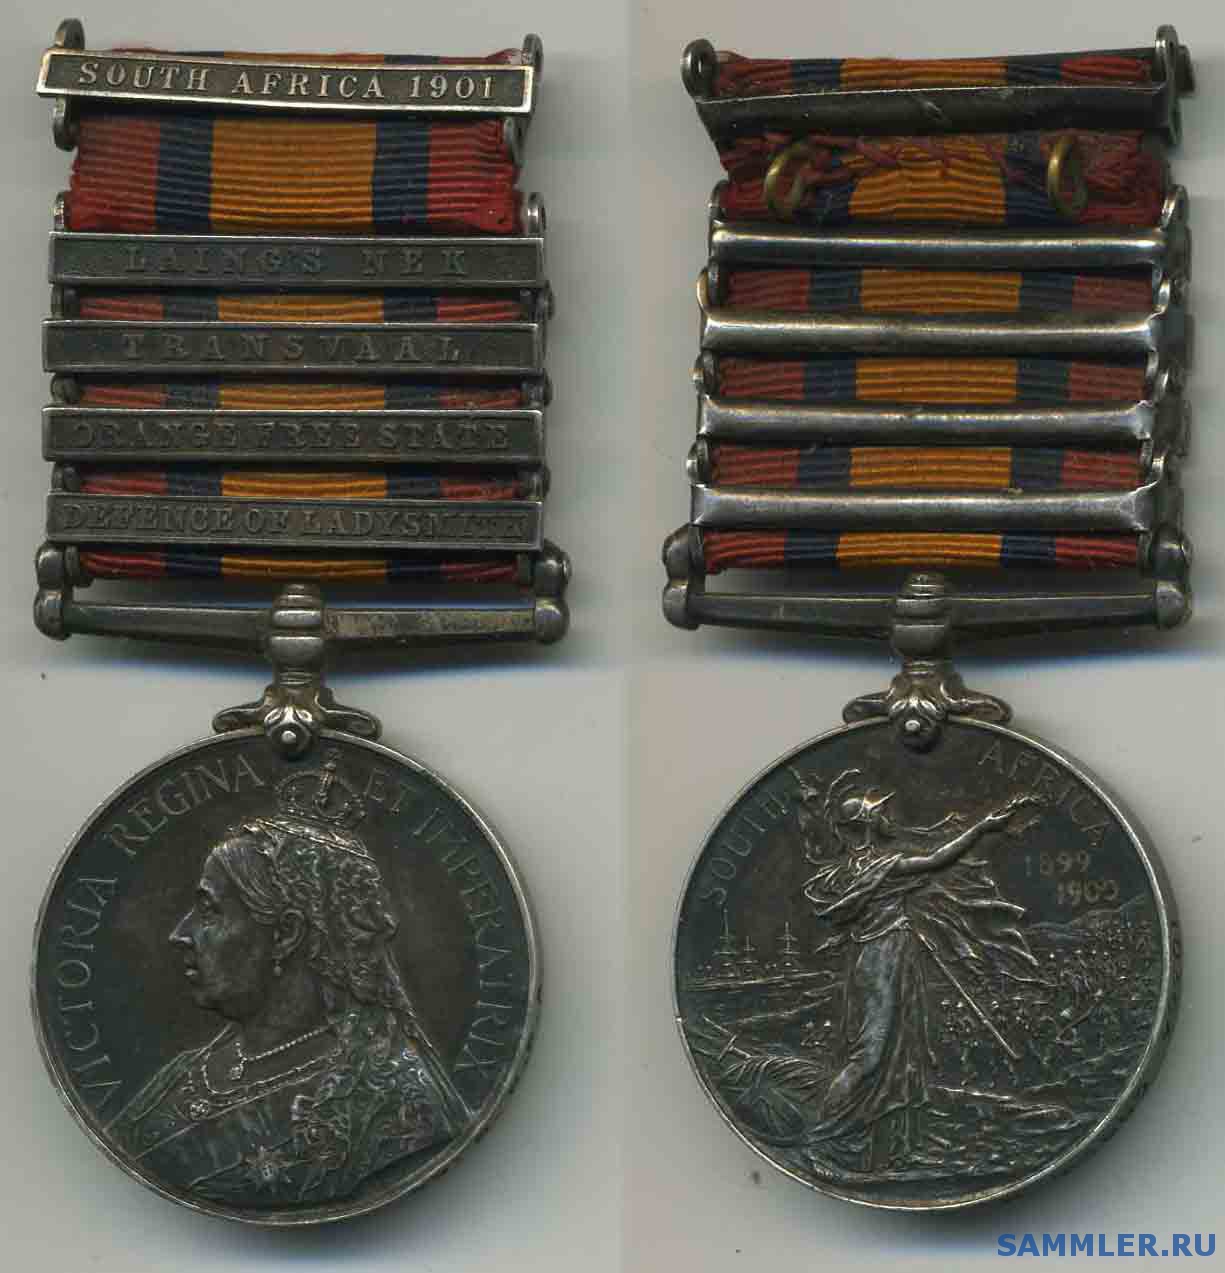 Queen__s_South_Africa_Medal_1st_type.jpg